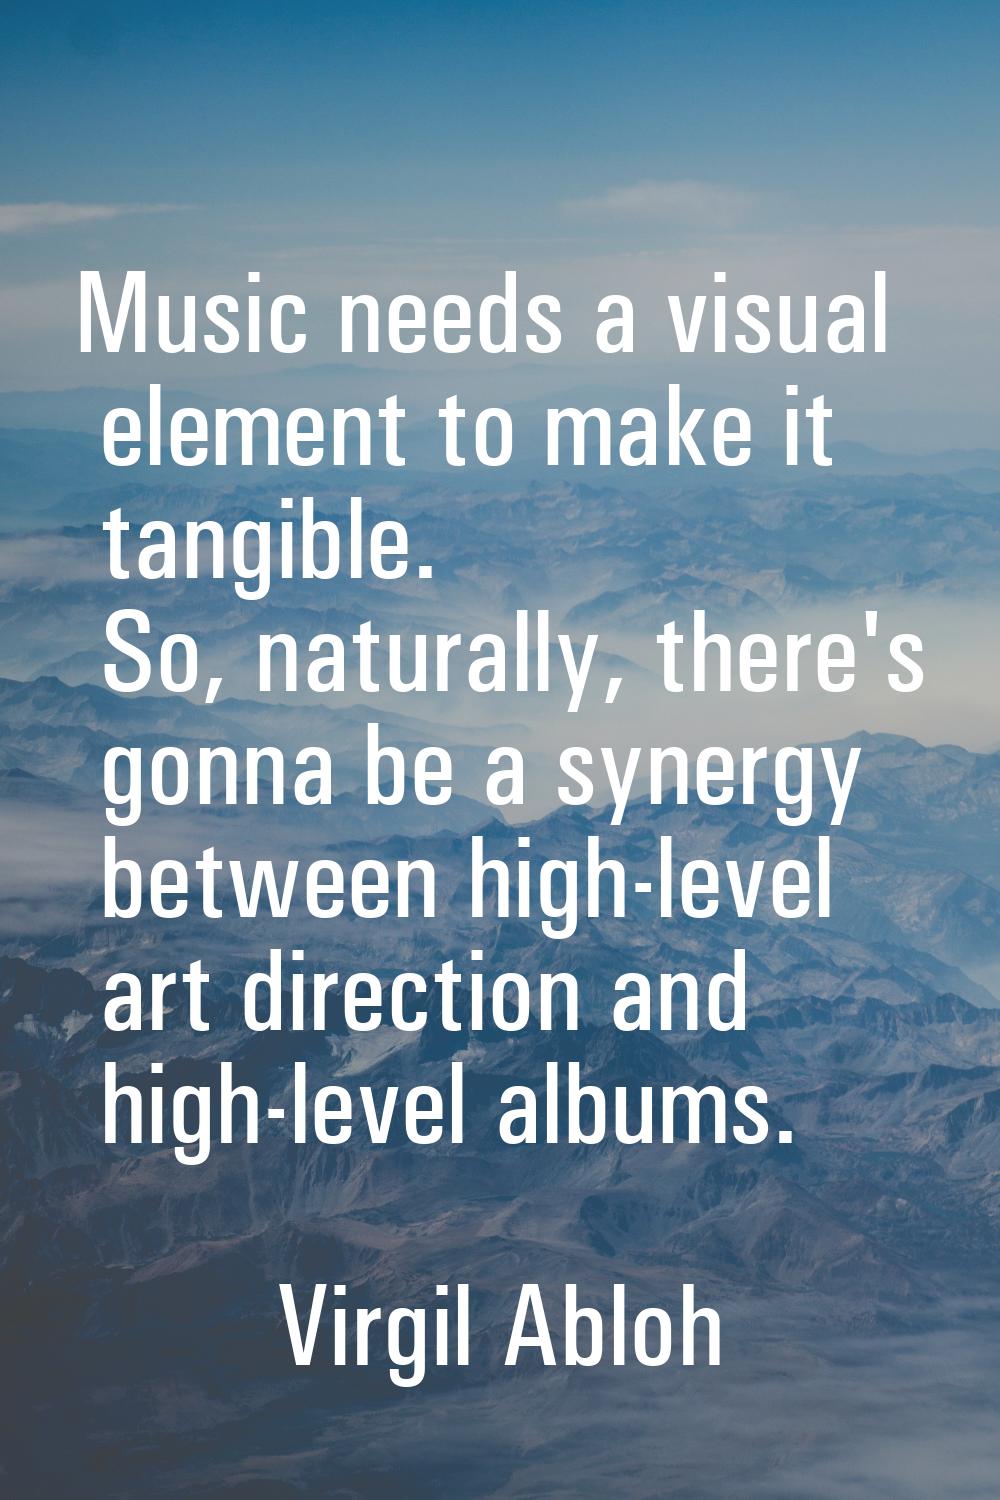 Music needs a visual element to make it tangible. So, naturally, there's gonna be a synergy between